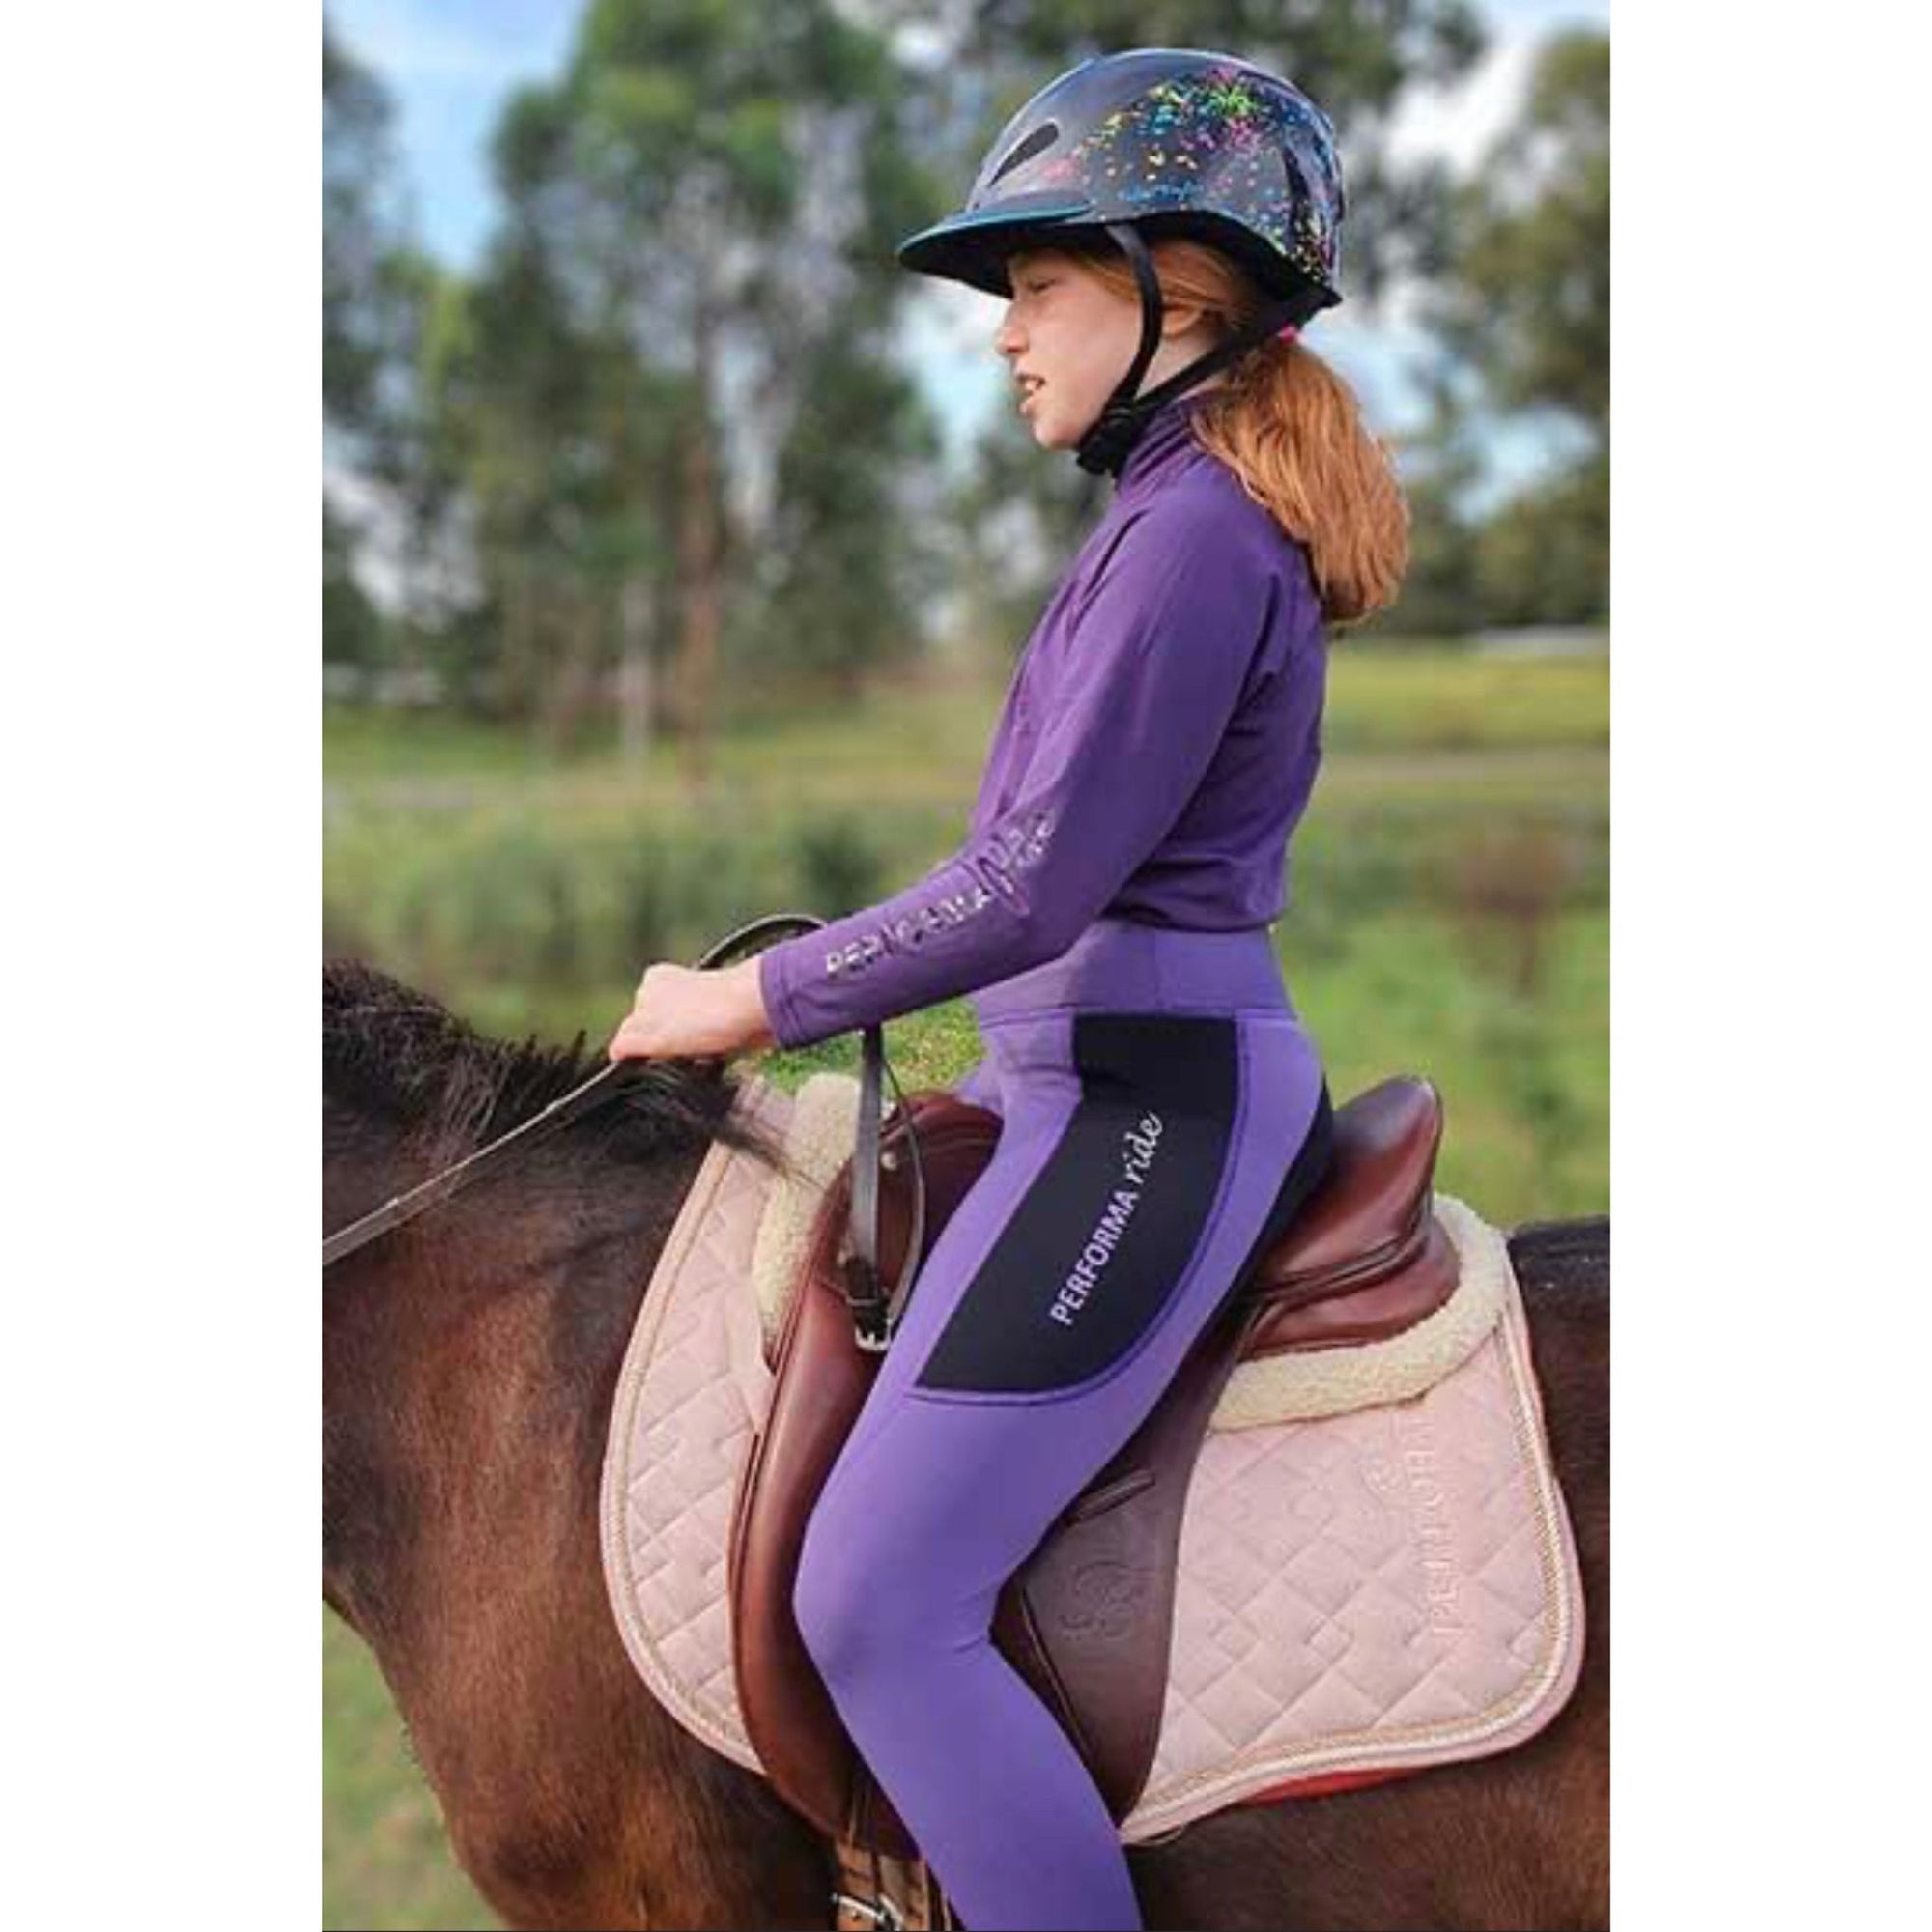 Aqua, Royal, Purple, Red and Black Youth Winter Riding Tops.